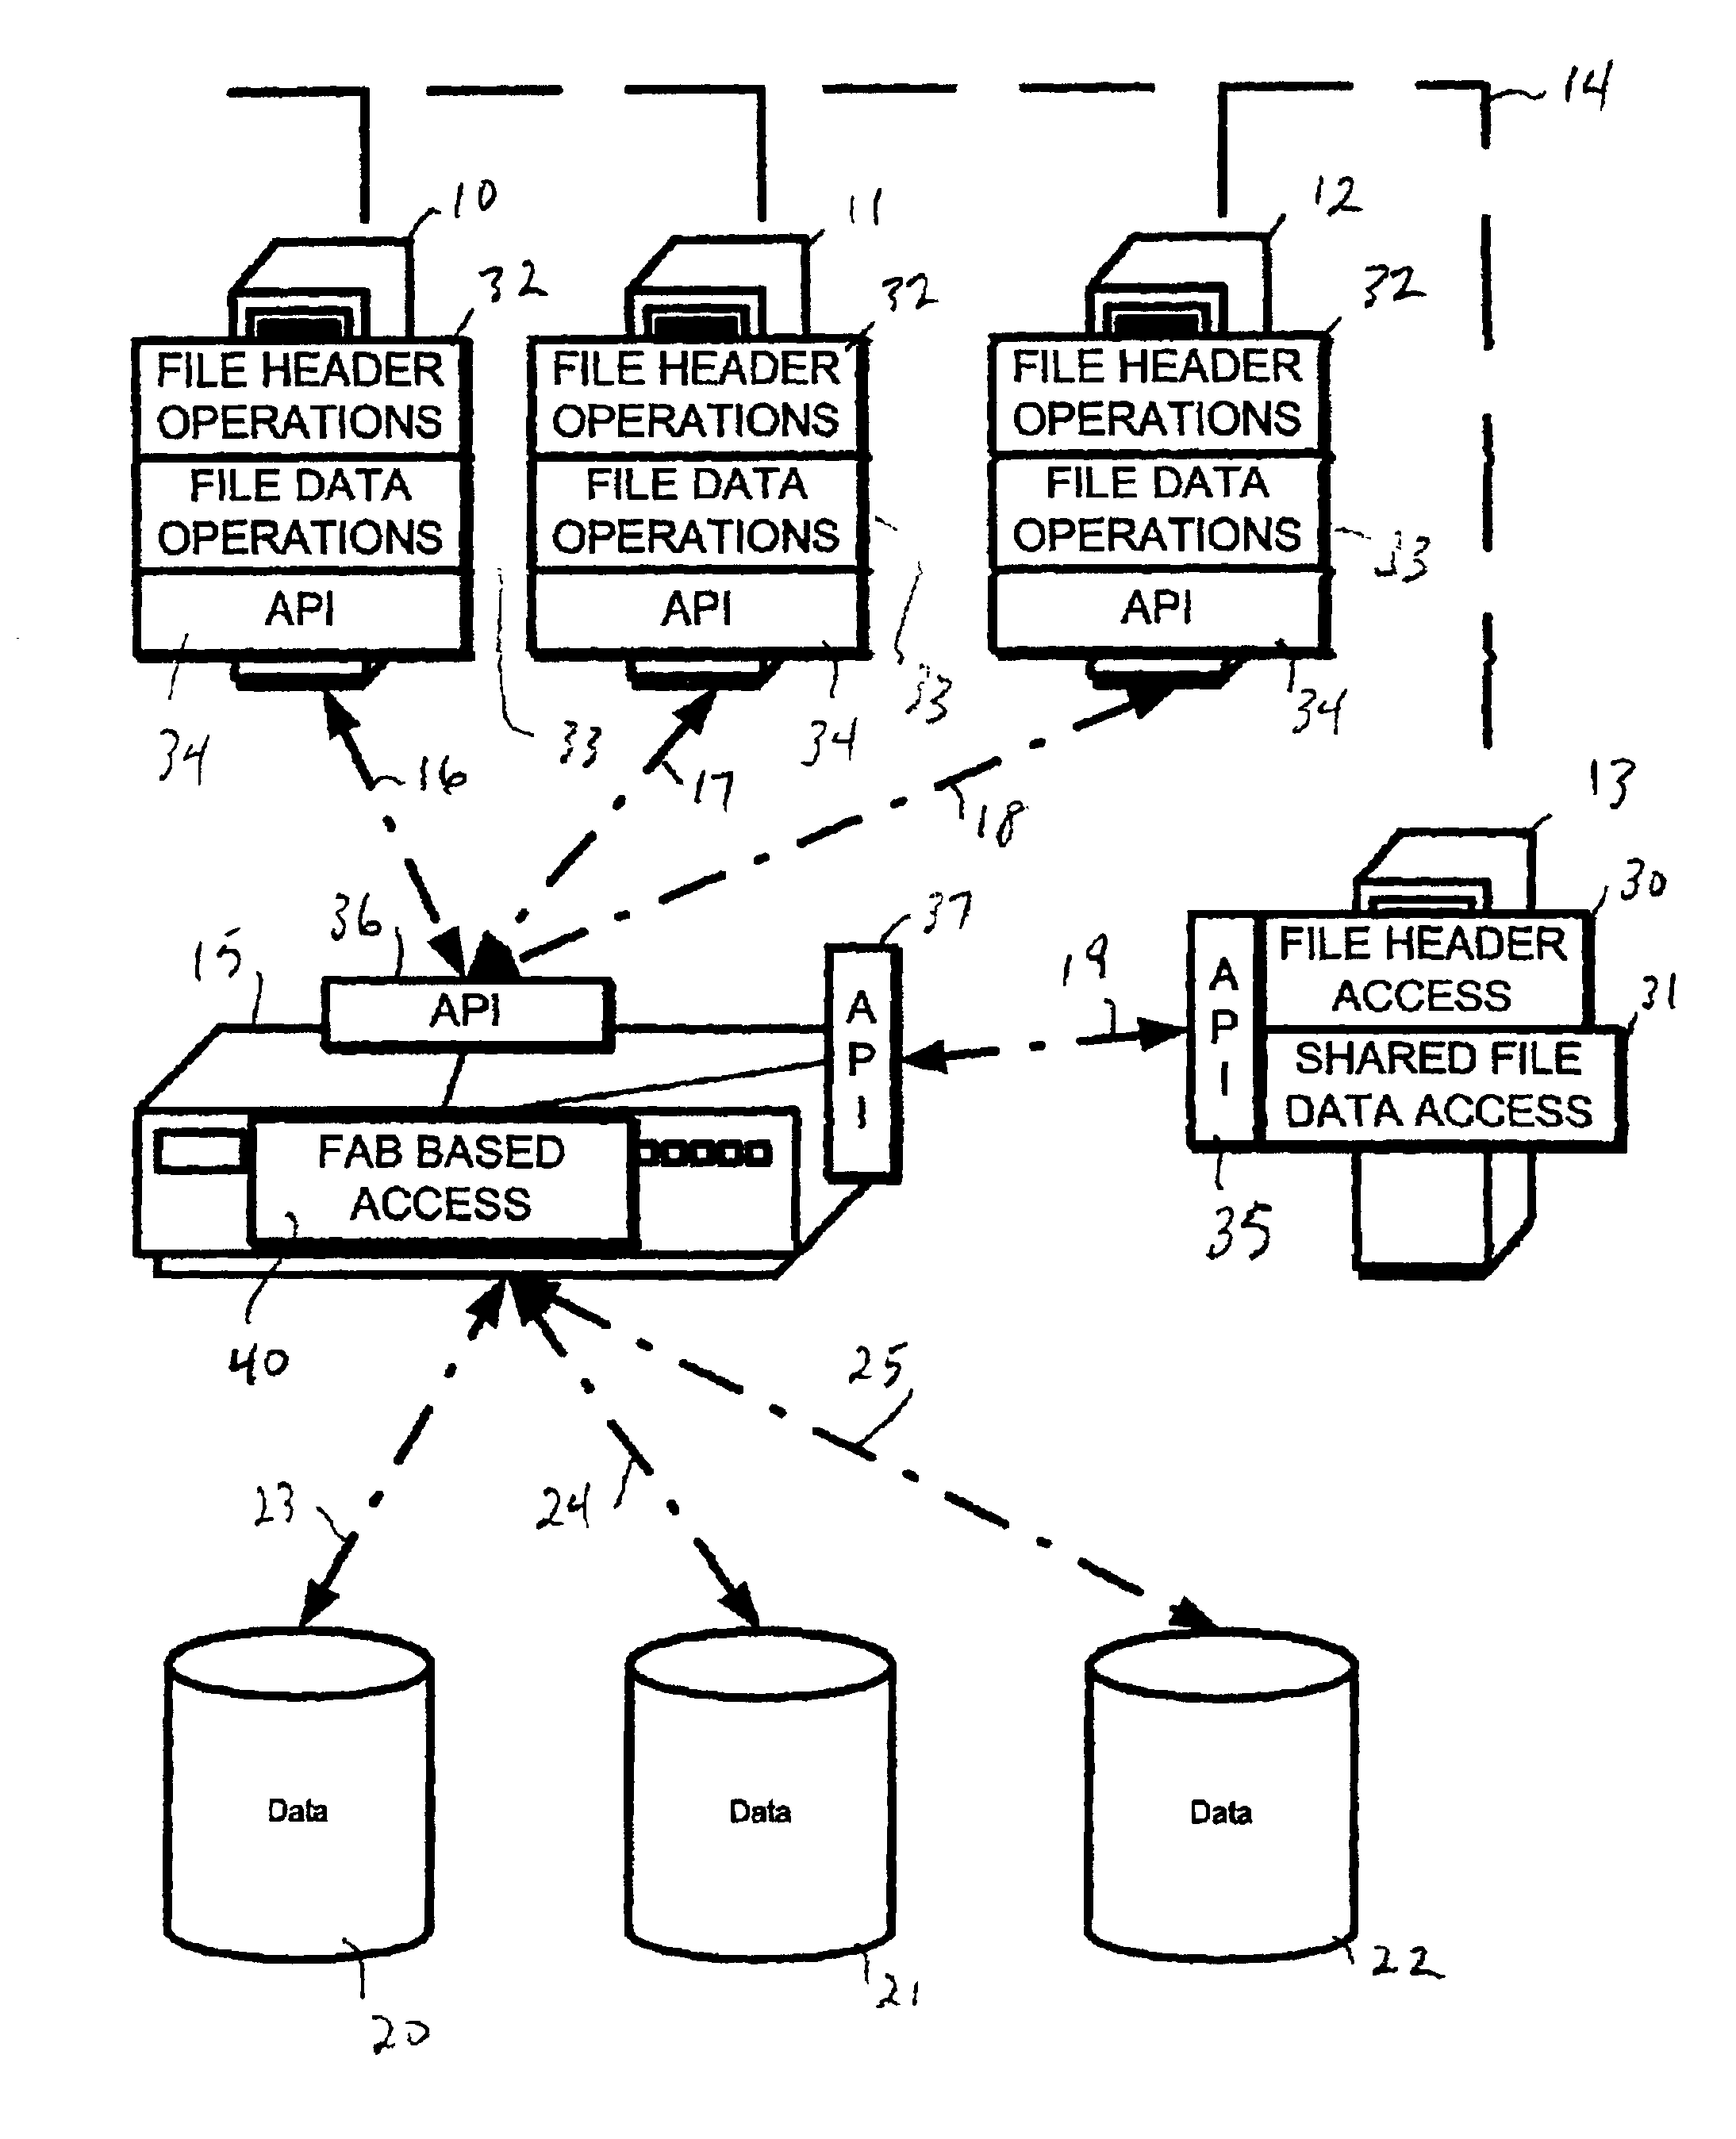 Architecture for access to embedded files using a SAN intermediate device